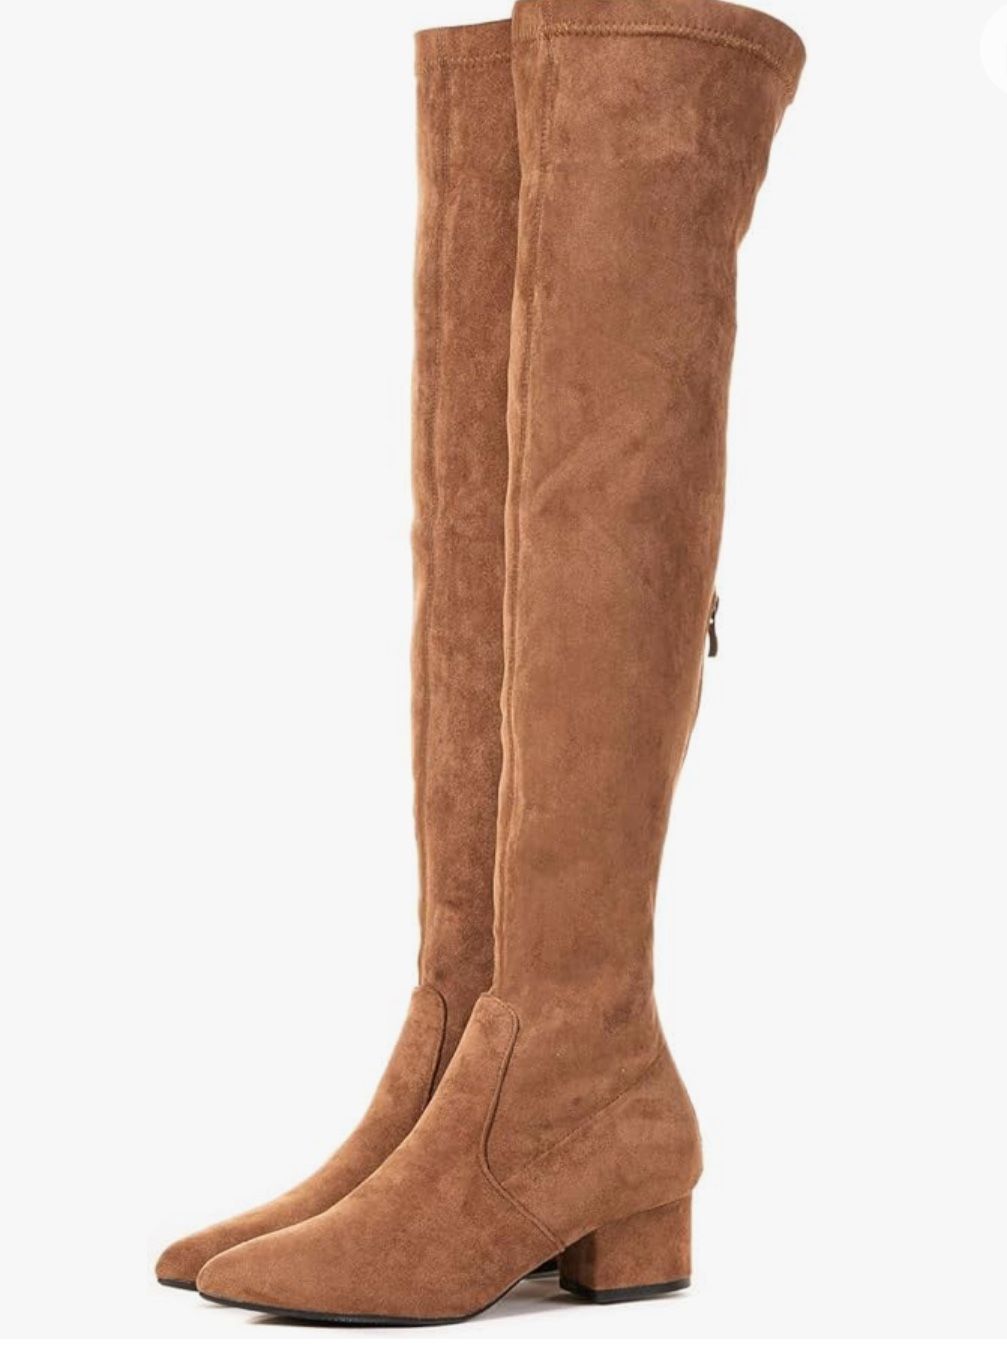 New Brown Suede Boots- Tan- Size 9- Thigh High - Comfort Toe & Heel 3”-New